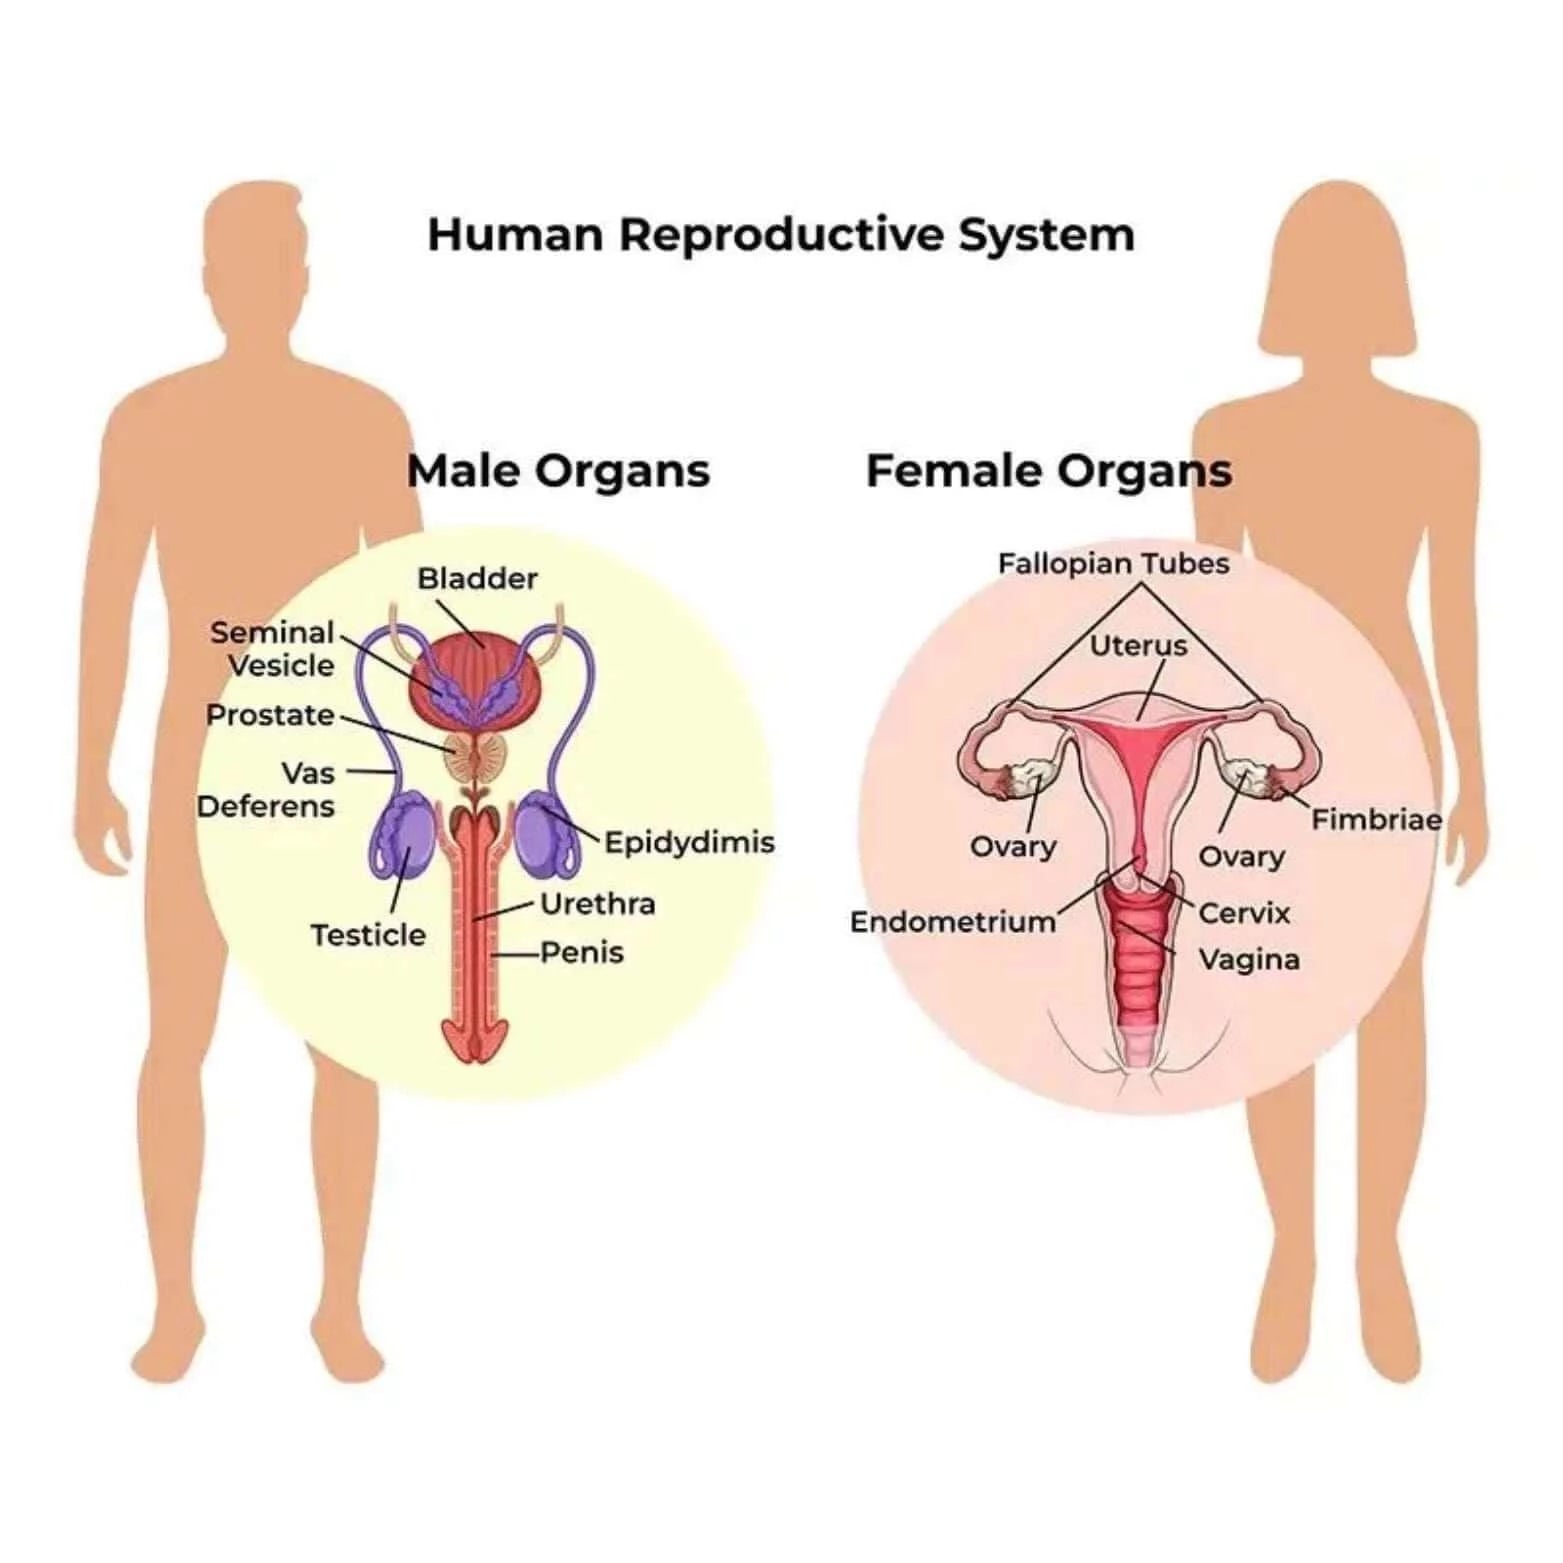 Reproductive system image